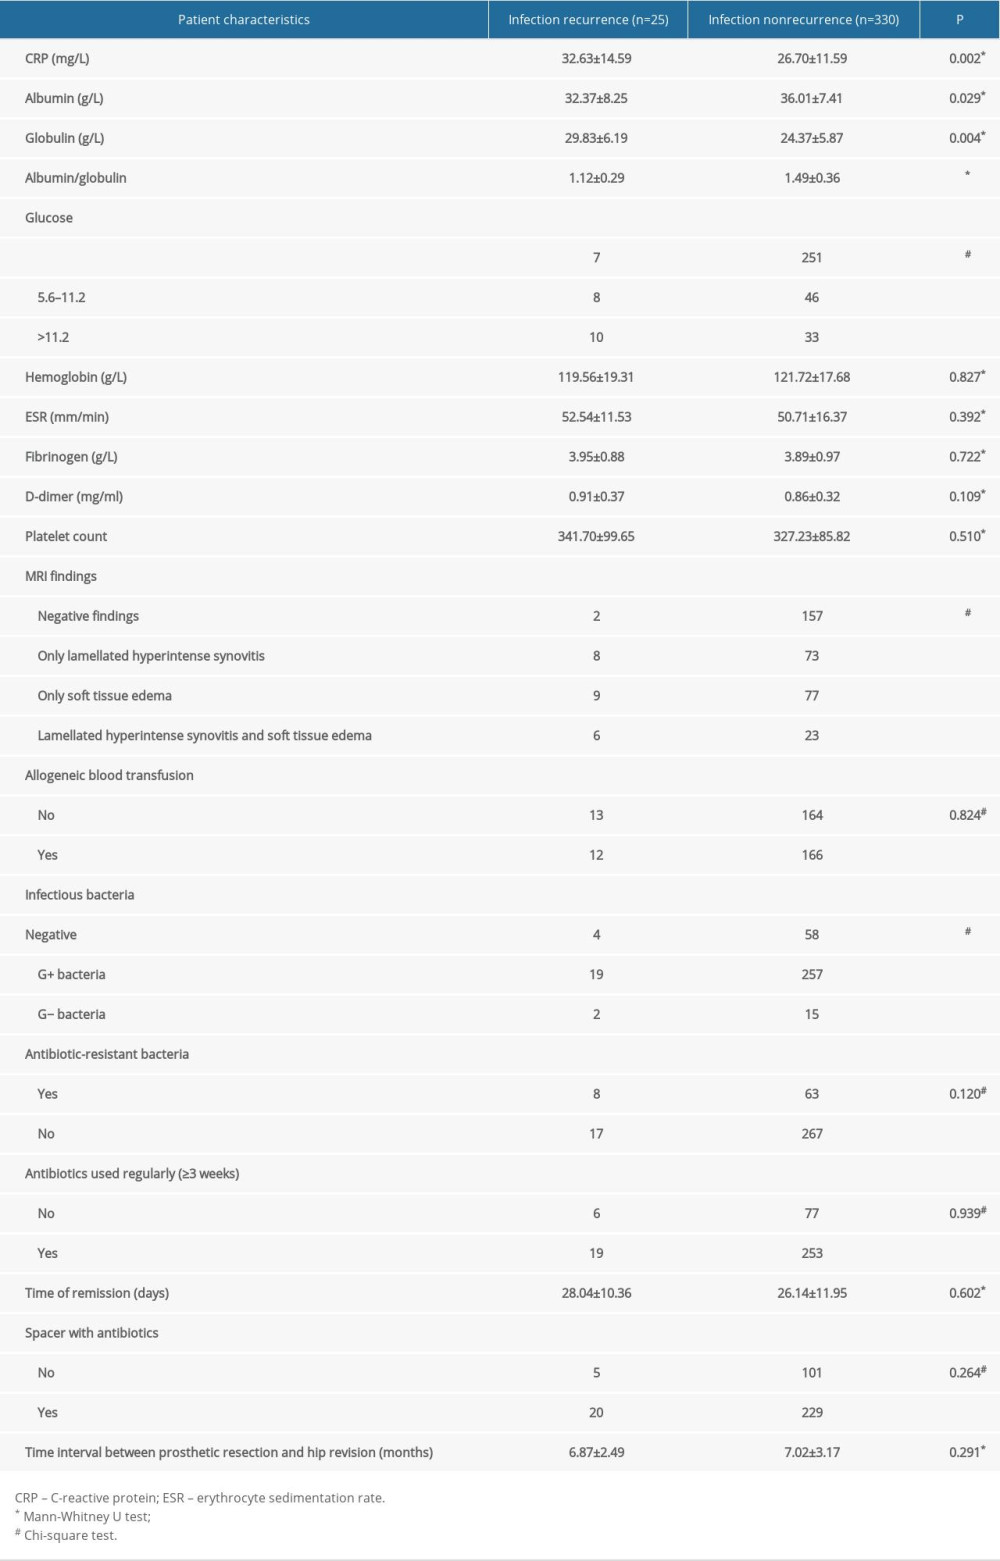 Results of hematological, bacteriological, and laboratory examinations of patients with periprosthetic joint infection undergoing 2-stage hip revision surgery.